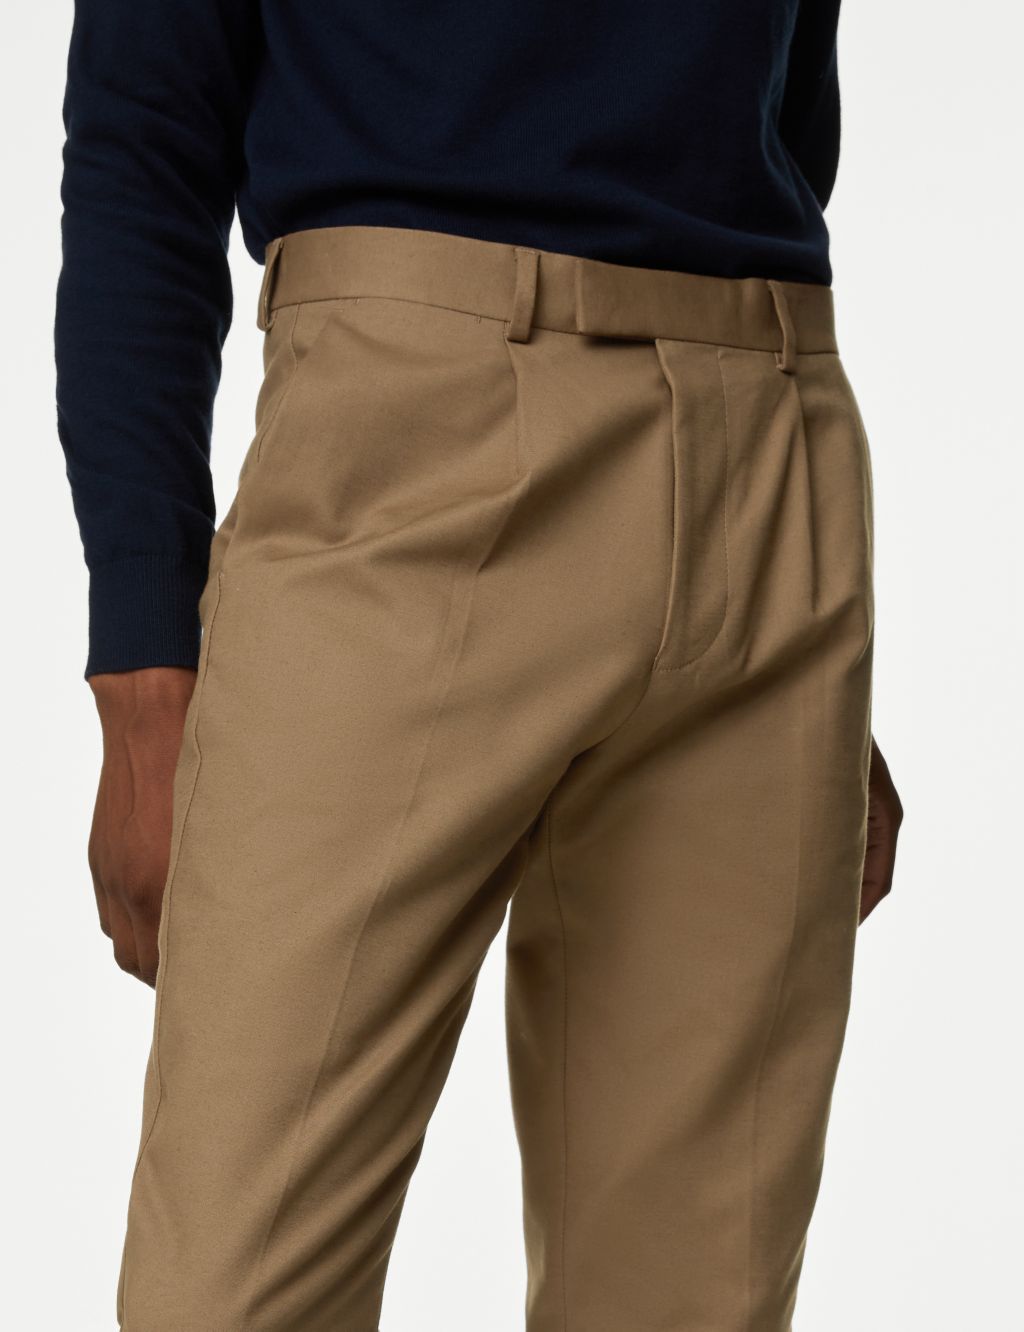 Tapered Fit Smart Stretch Chinos image 6